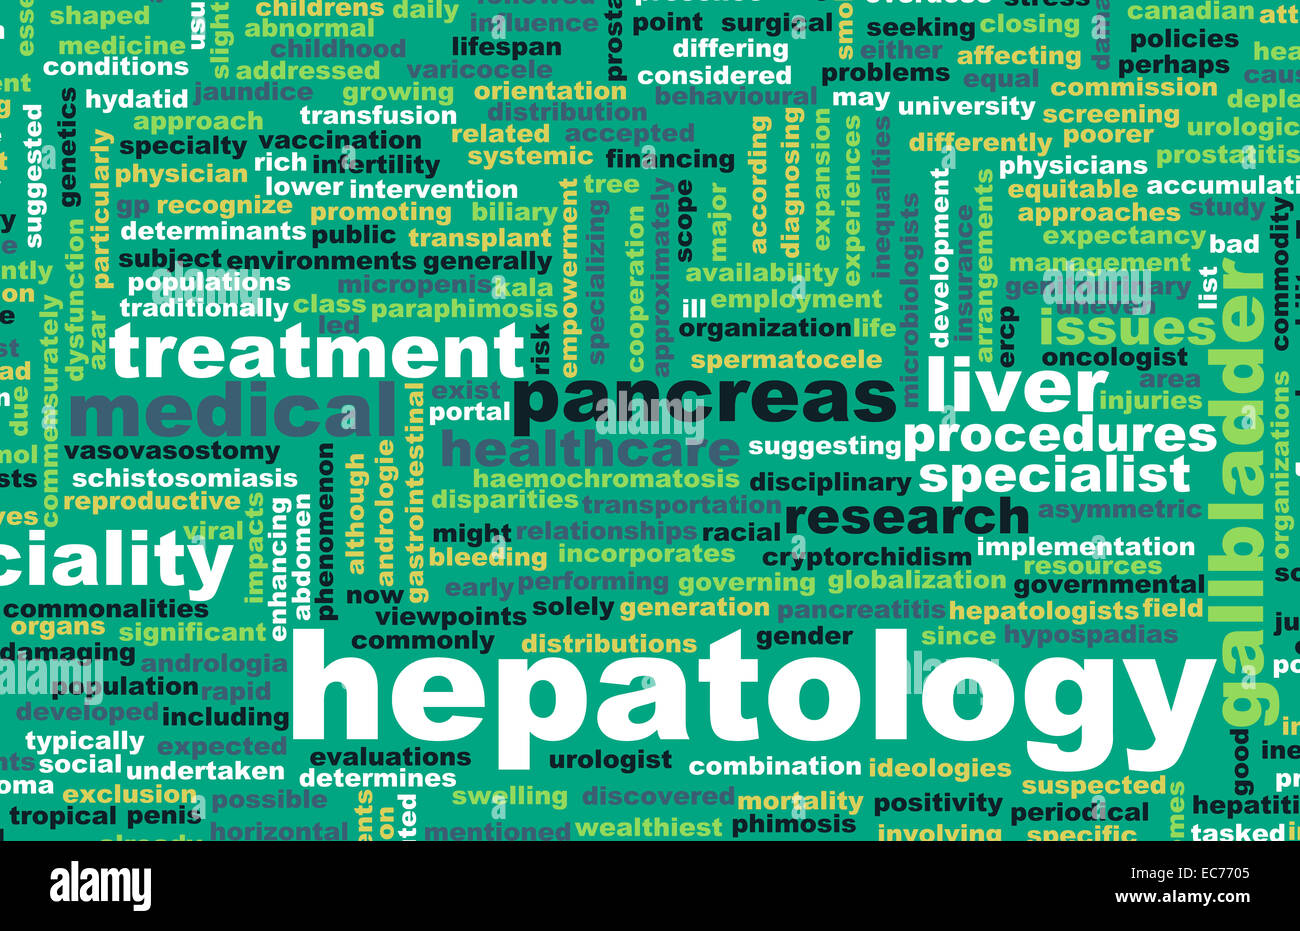 Hepatology or Hepatologist Medical Field Specialty As Art Stock Photo